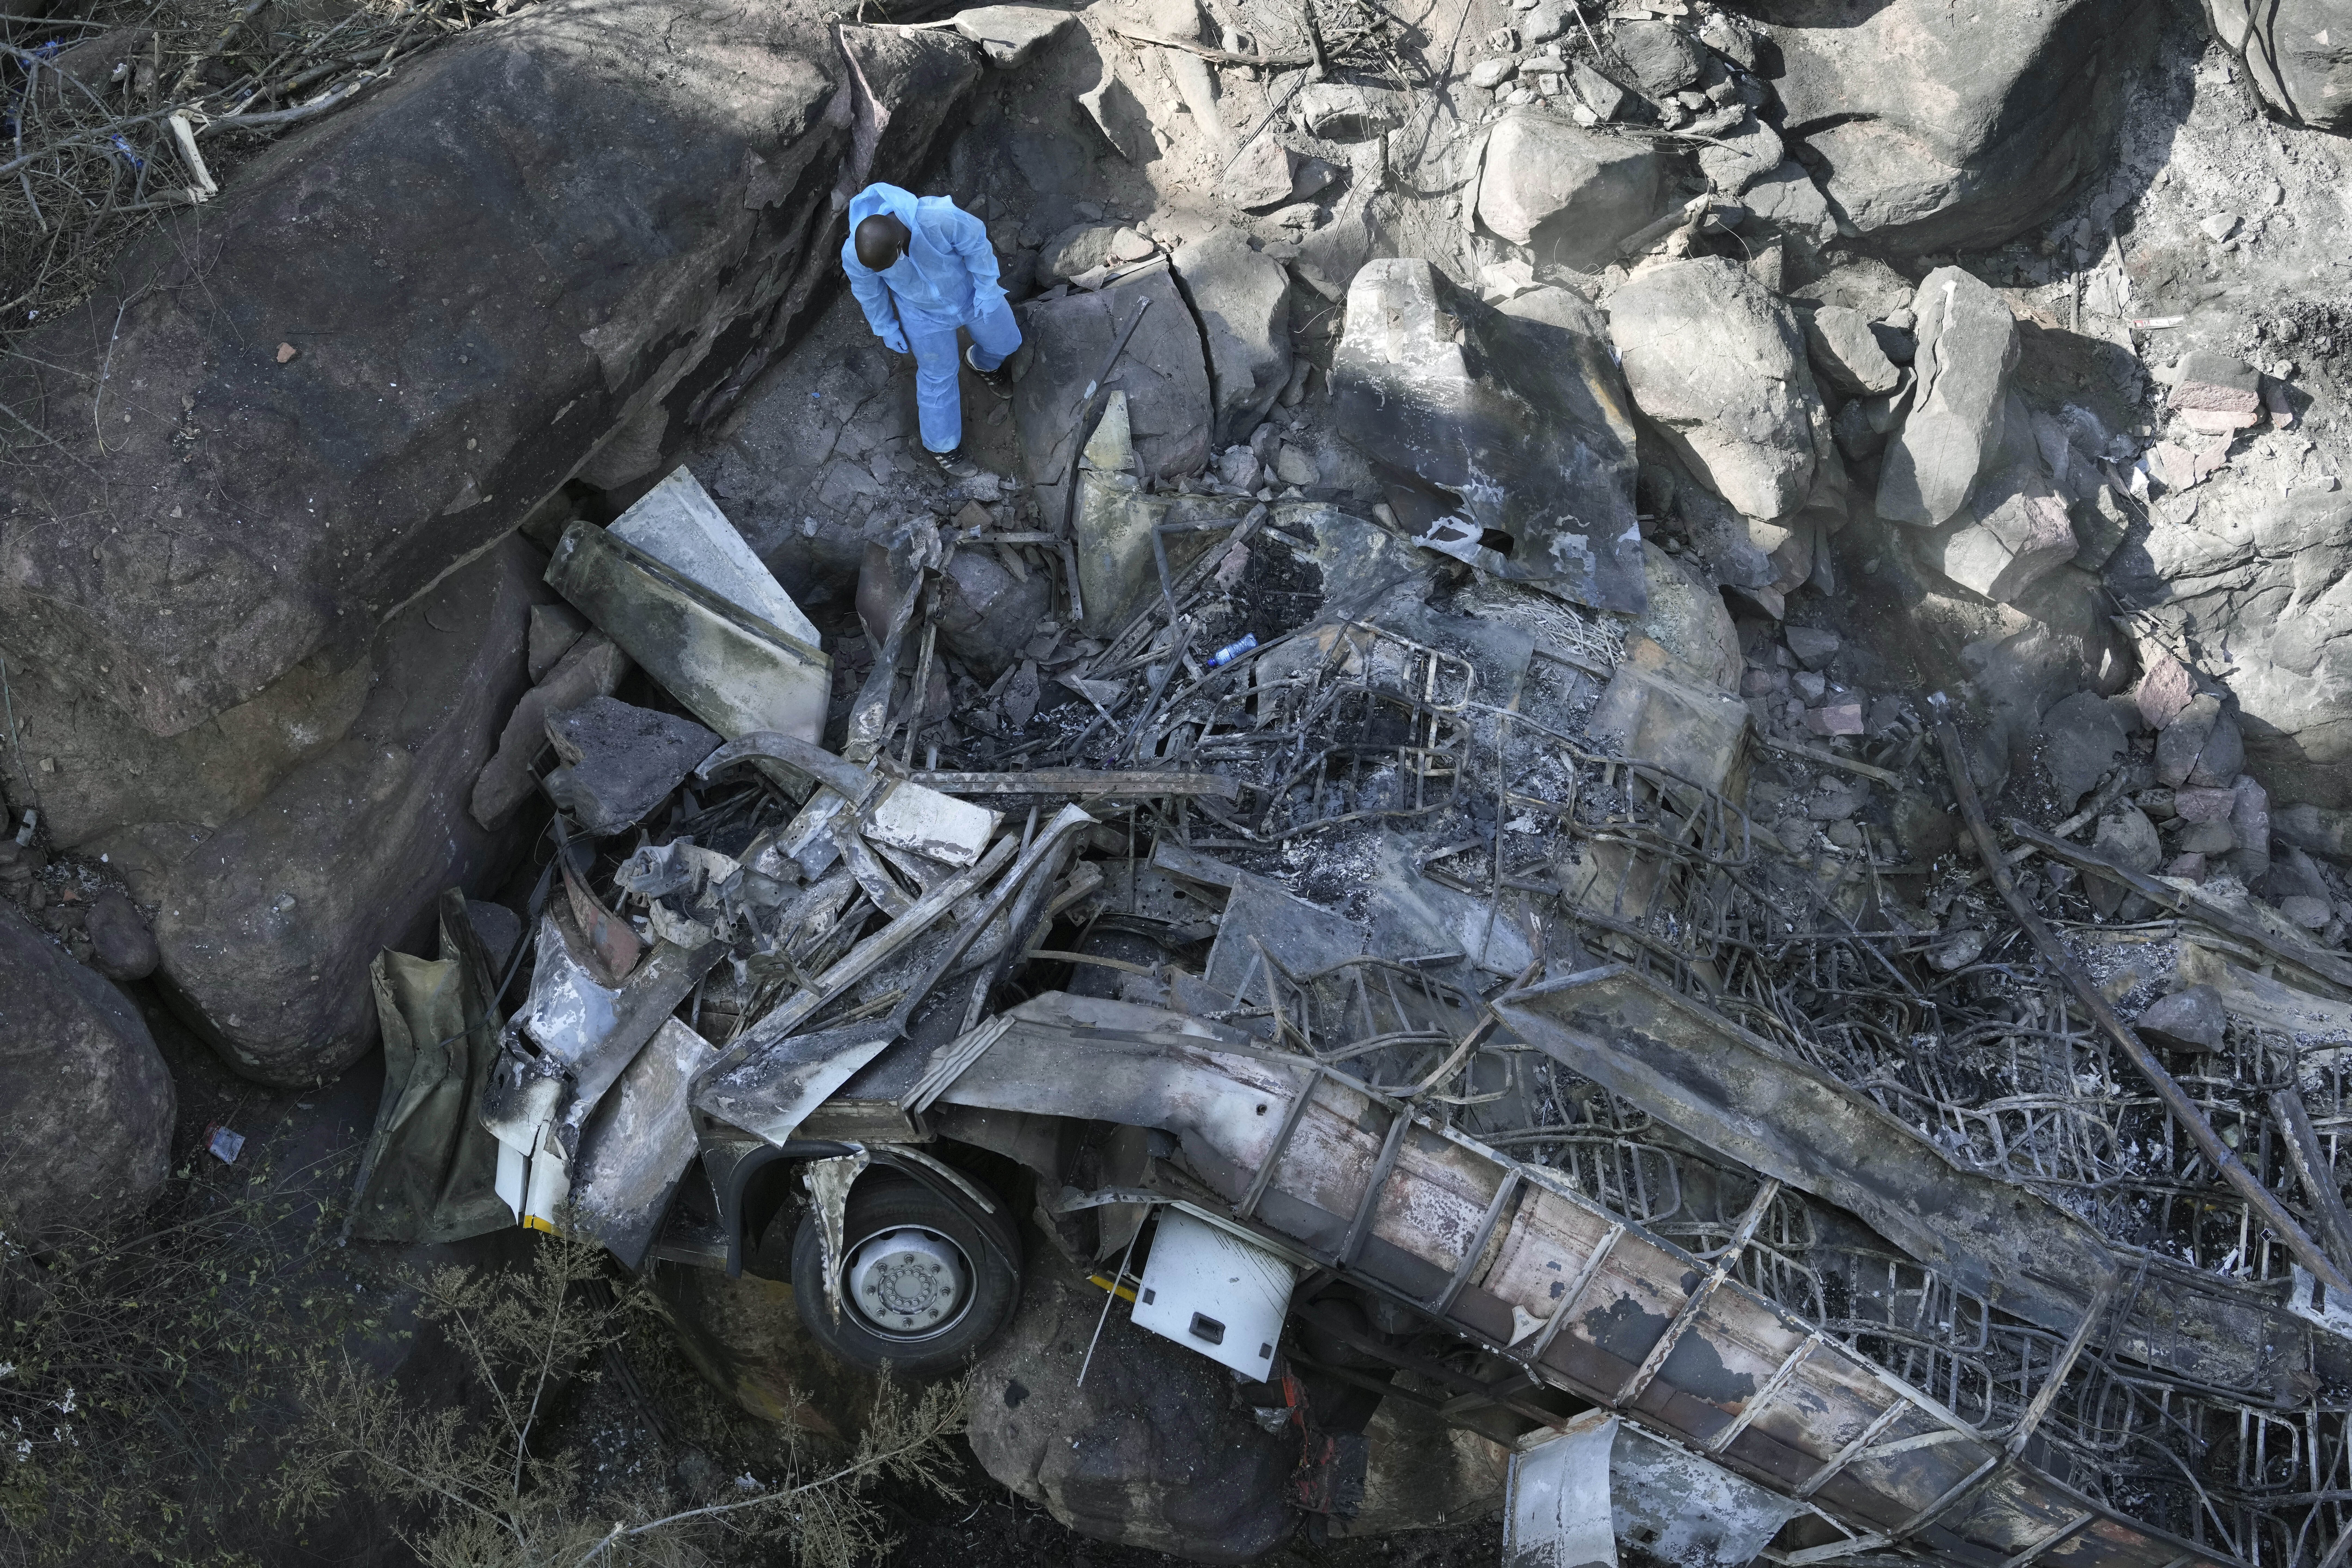 The wreckage of a bus lays in a ravine a day after it plunged off a bridge on the Mmamatlakala mountain pass between Mokopane and Marken, around 300km (190 miles) north of Johannesburg, South Africa, Friday, March 29, 2024. The bus carrying worshippers on a long-distance trip from Botswana to an Easter weekend church gathering in South Africa plunged off a bridge on a mountain pass Thursday and burst into flames as it hit the rocky ground below, killing at least 45 people, authorities said. The only survivor was an 8-year-old child who was receiving medical attention for serious injuries. Photo credit: Themba Hadebe, The Associated Press